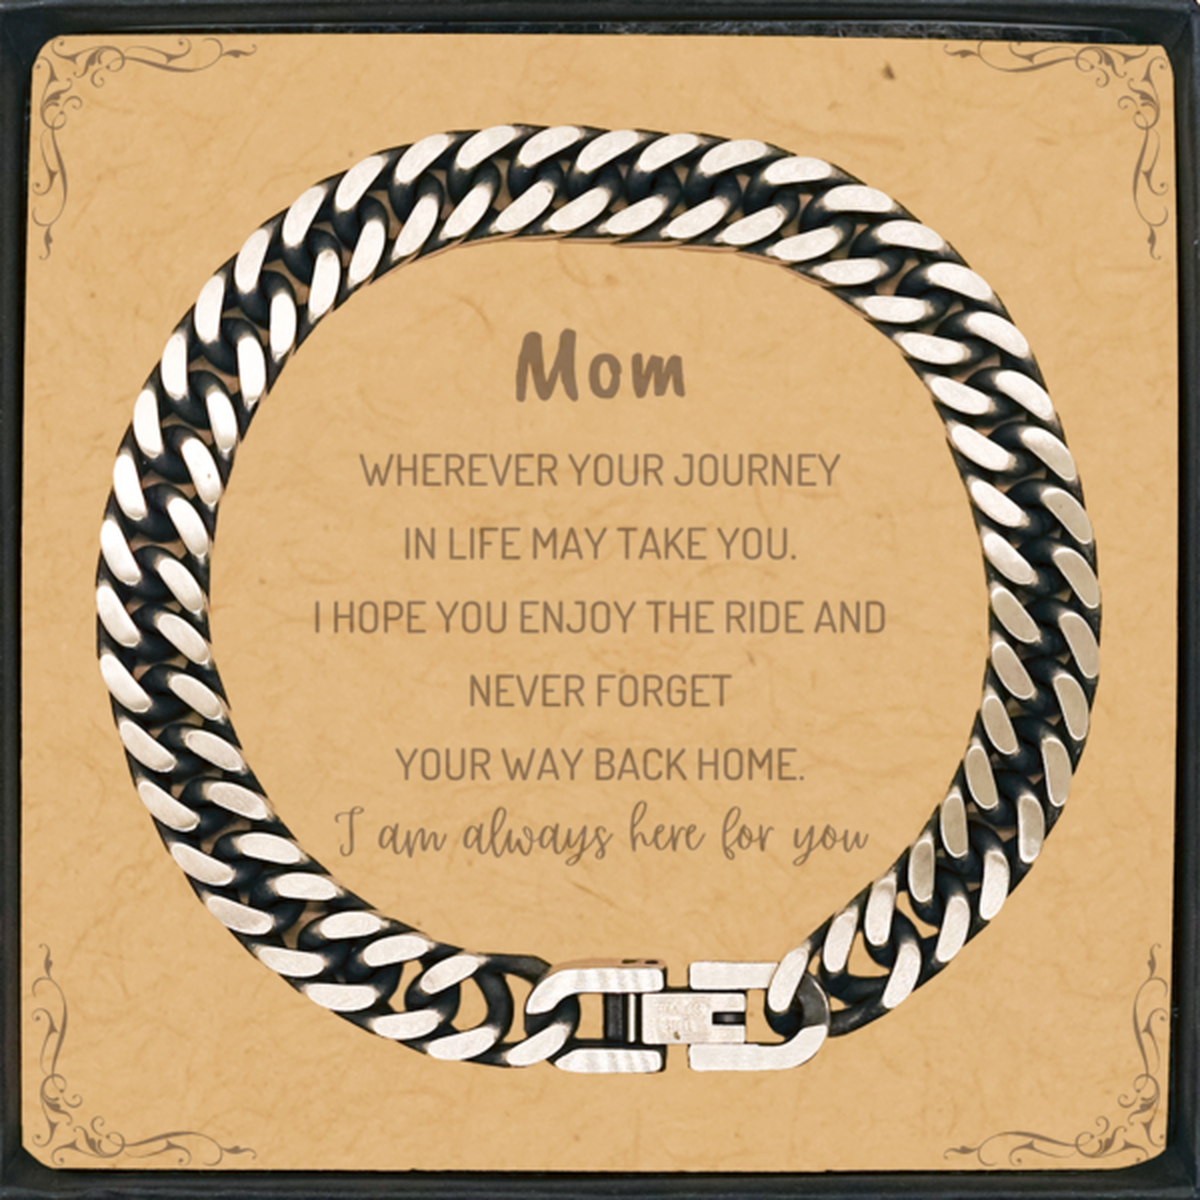 Mom wherever your journey in life may take you, I am always here for you Mom Cuban Link Chain Bracelet, Awesome Christmas Gifts For Mom Message Card, Mom Birthday Gifts for Men Women Family Loved One